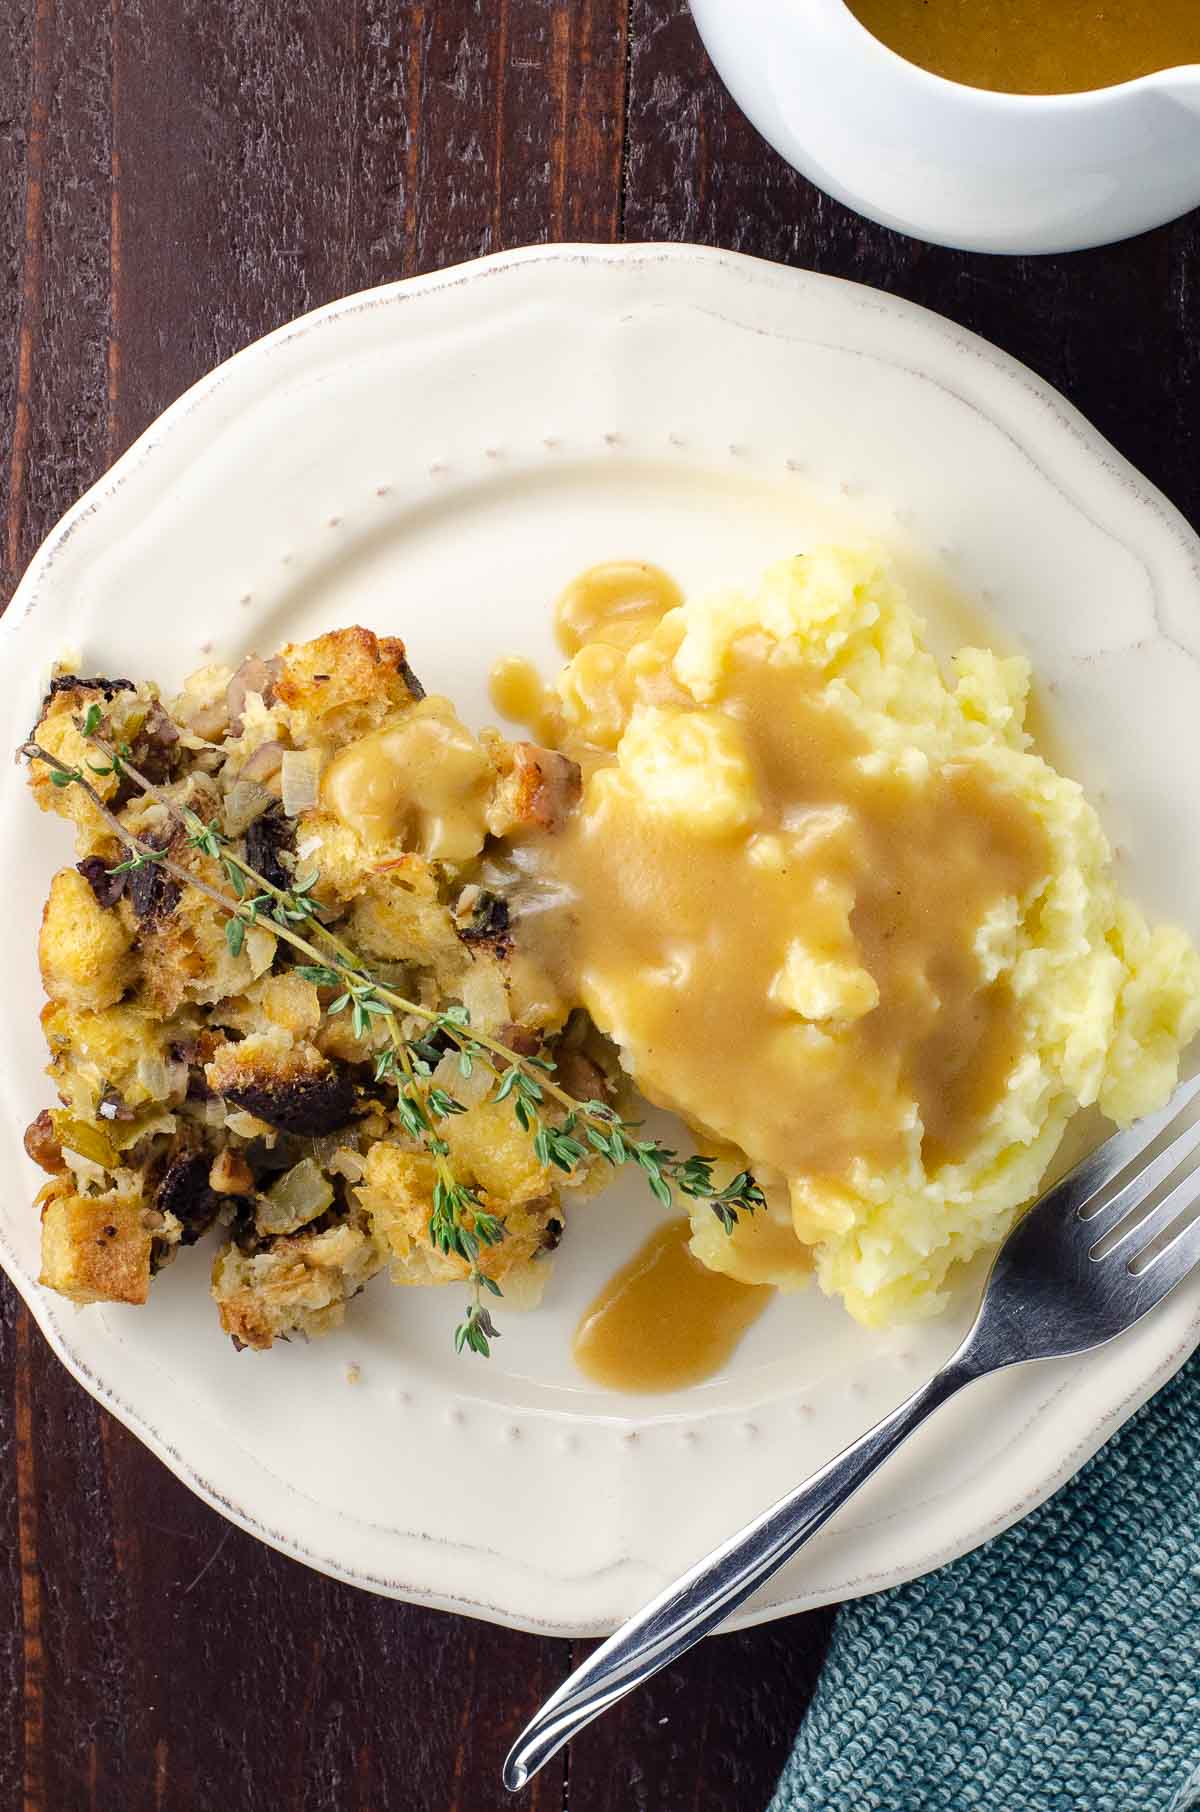 yukon gold mashed potatoes from a small batch on a plate with stuffing and gravy